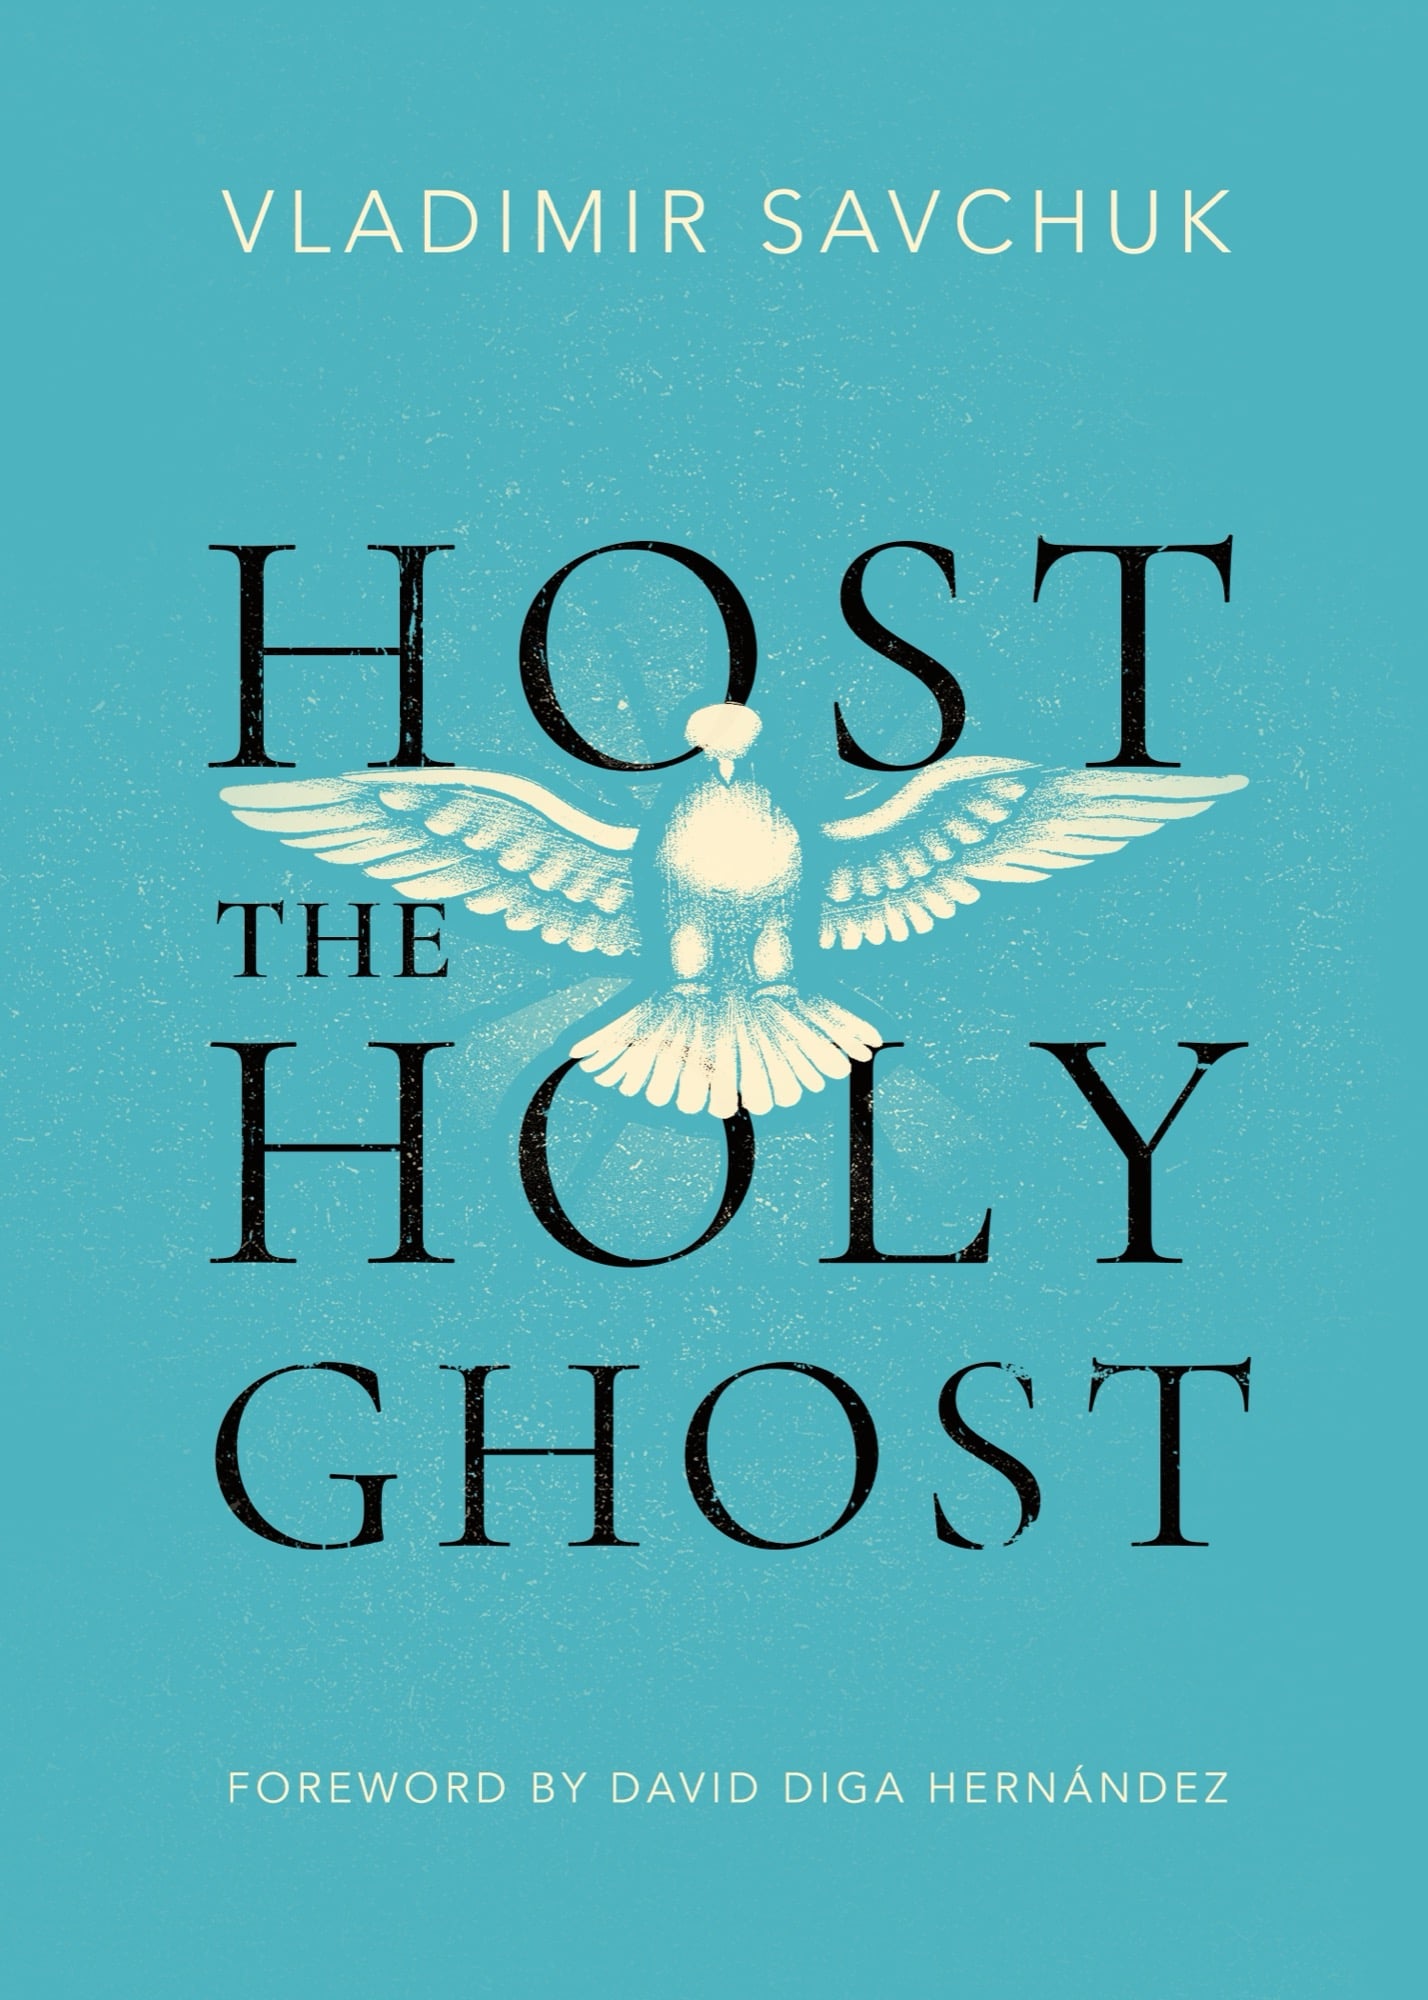 Featured Image for “Host the Holy Ghost”